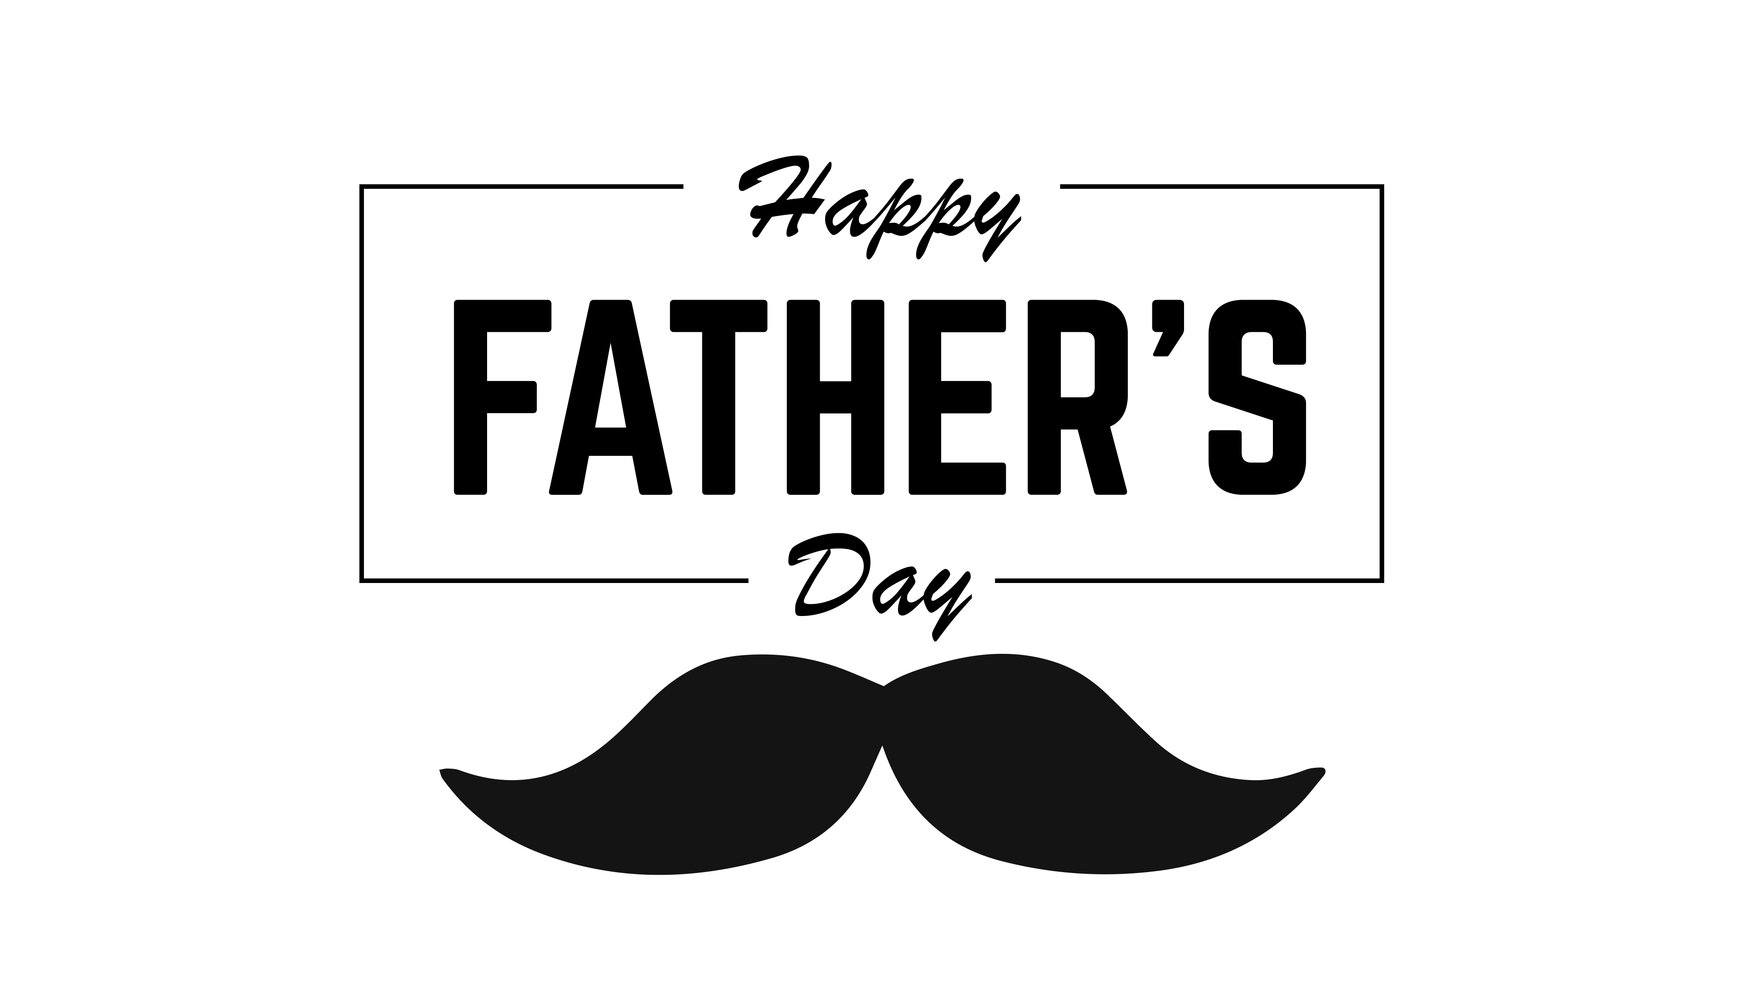 Free White Father's Day Background - EPS, Illustrator, JPG, PNG, SVG |  